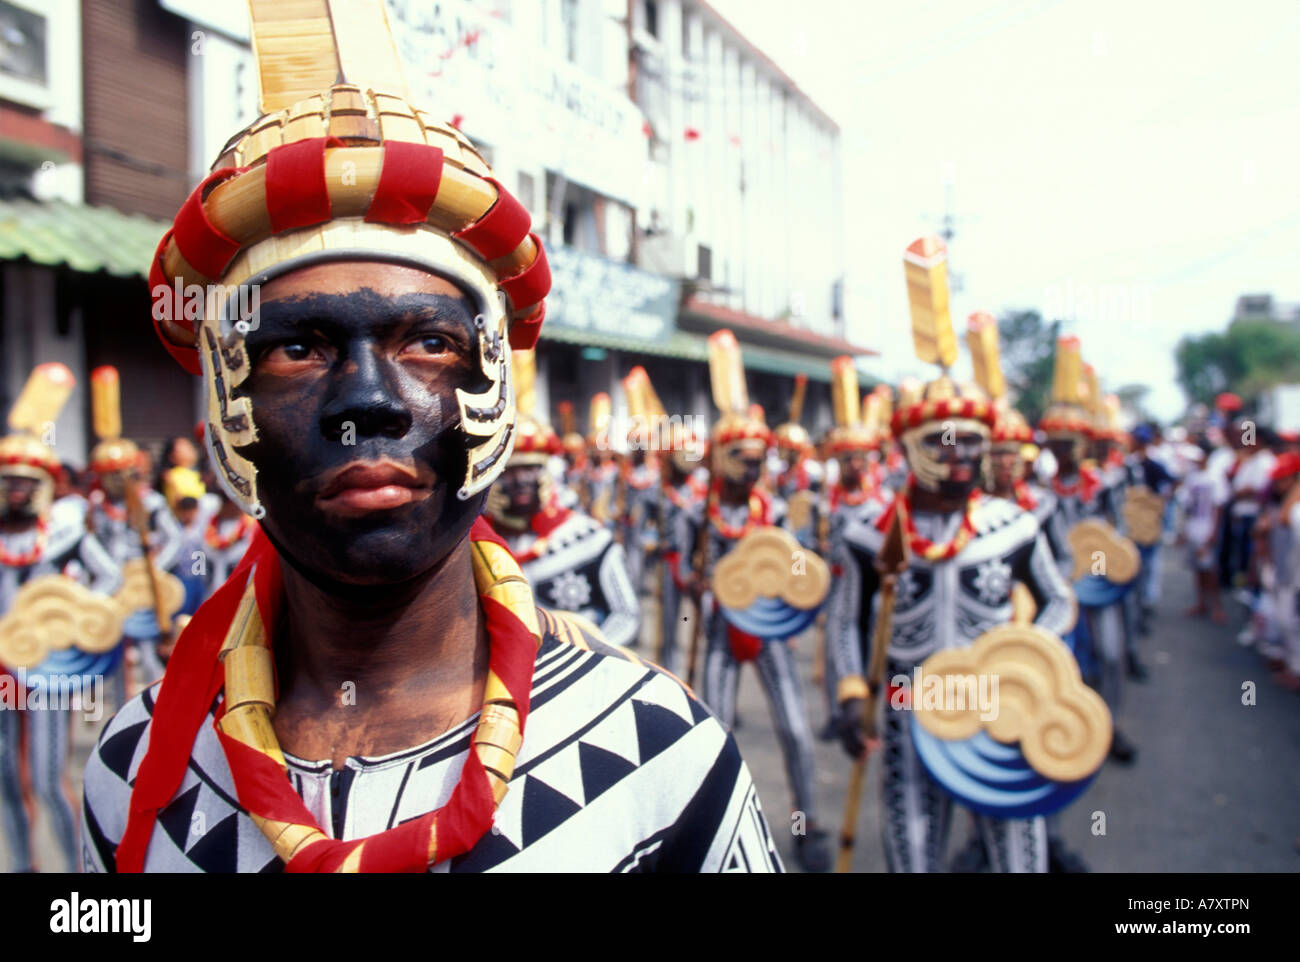 Philippines, Costumed marching band in Dinagyang Festival in Iloilo, on Panay Island. Stock Photo